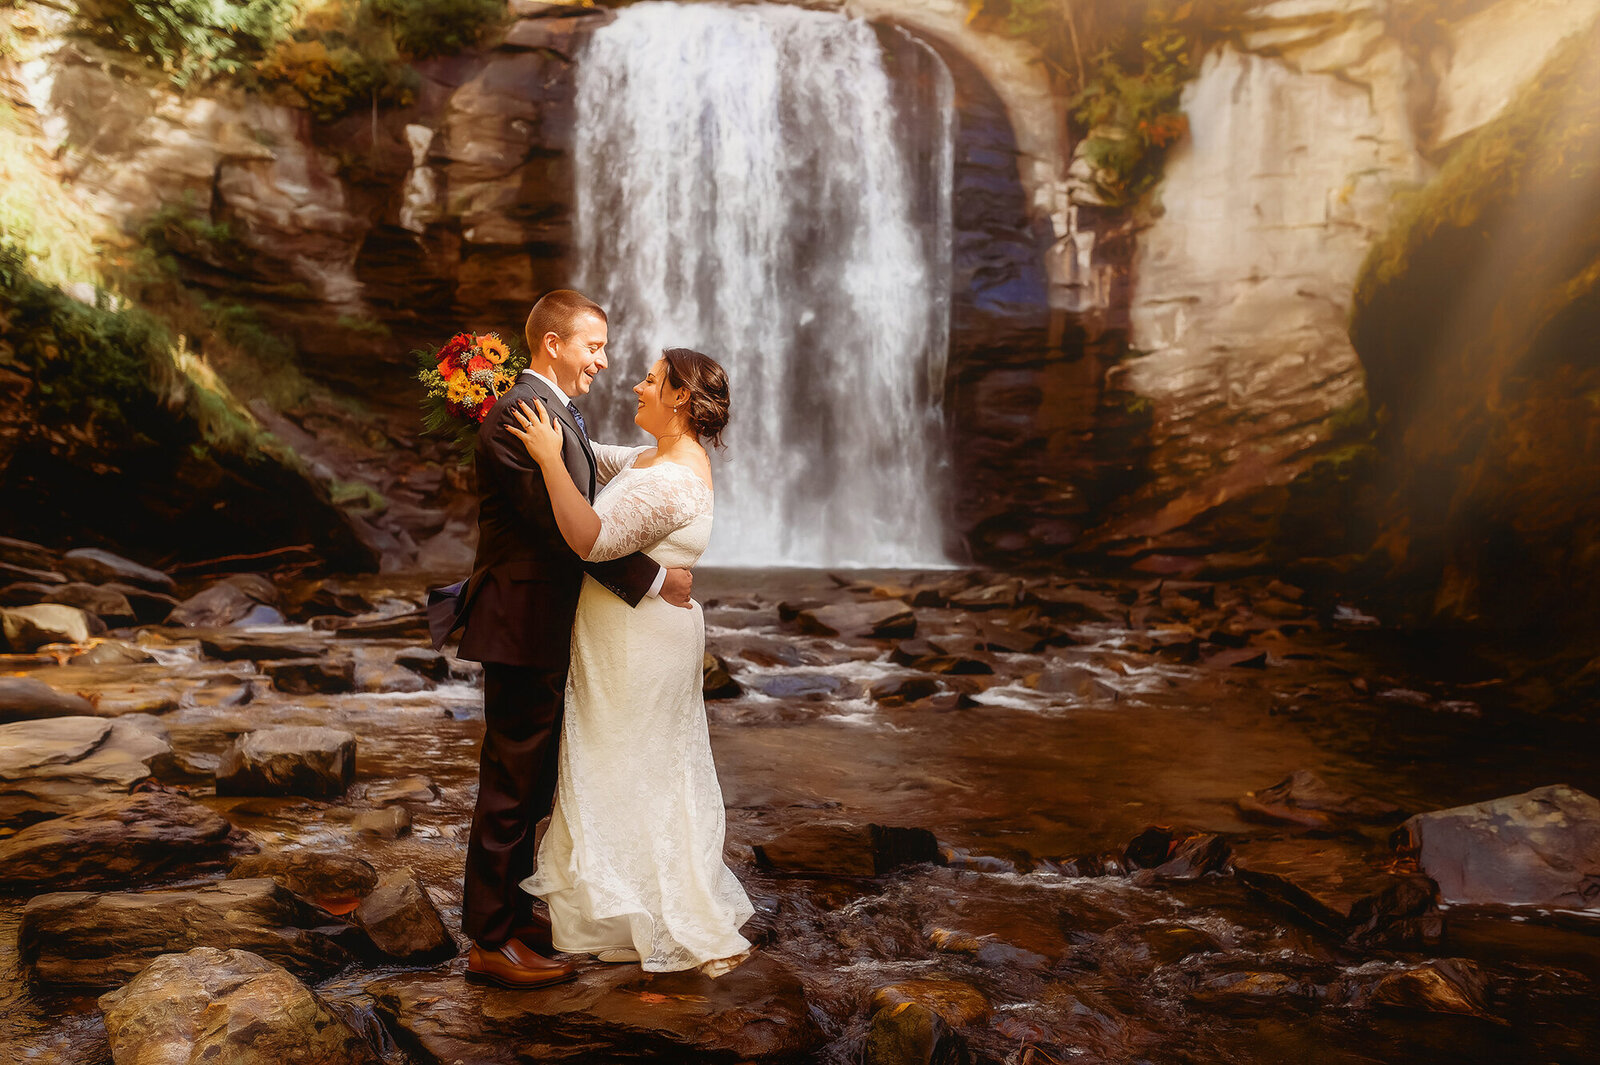 Bride and Groom embrace during their Elopement at Looking Glass Falls in Brevard, NC.